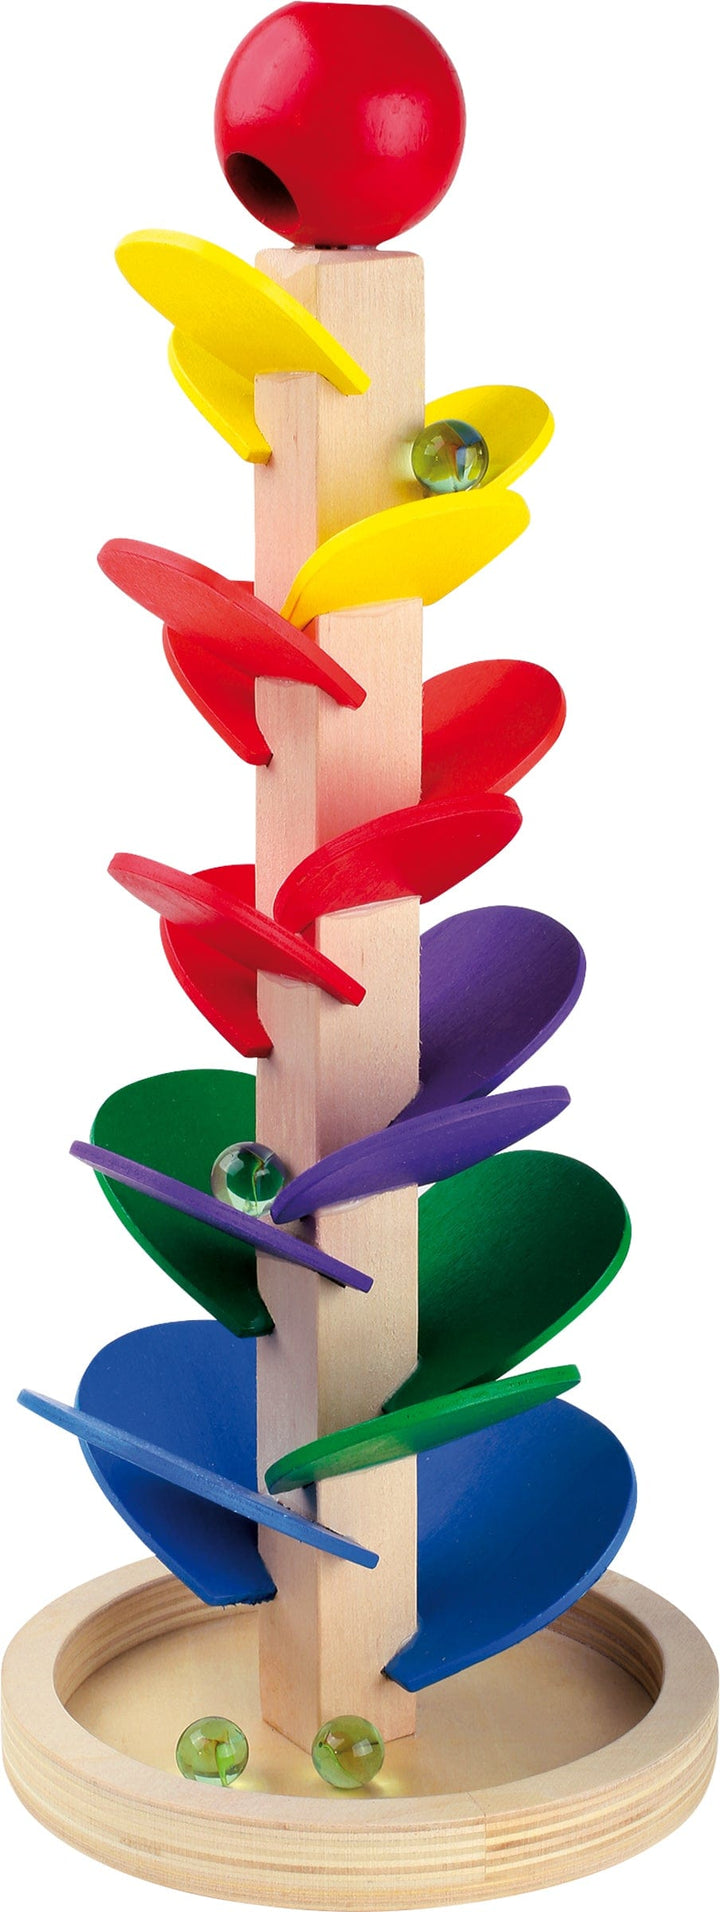 Small Foot Toys > Games > Marble Runs Small Foot Marble Run - Sounds